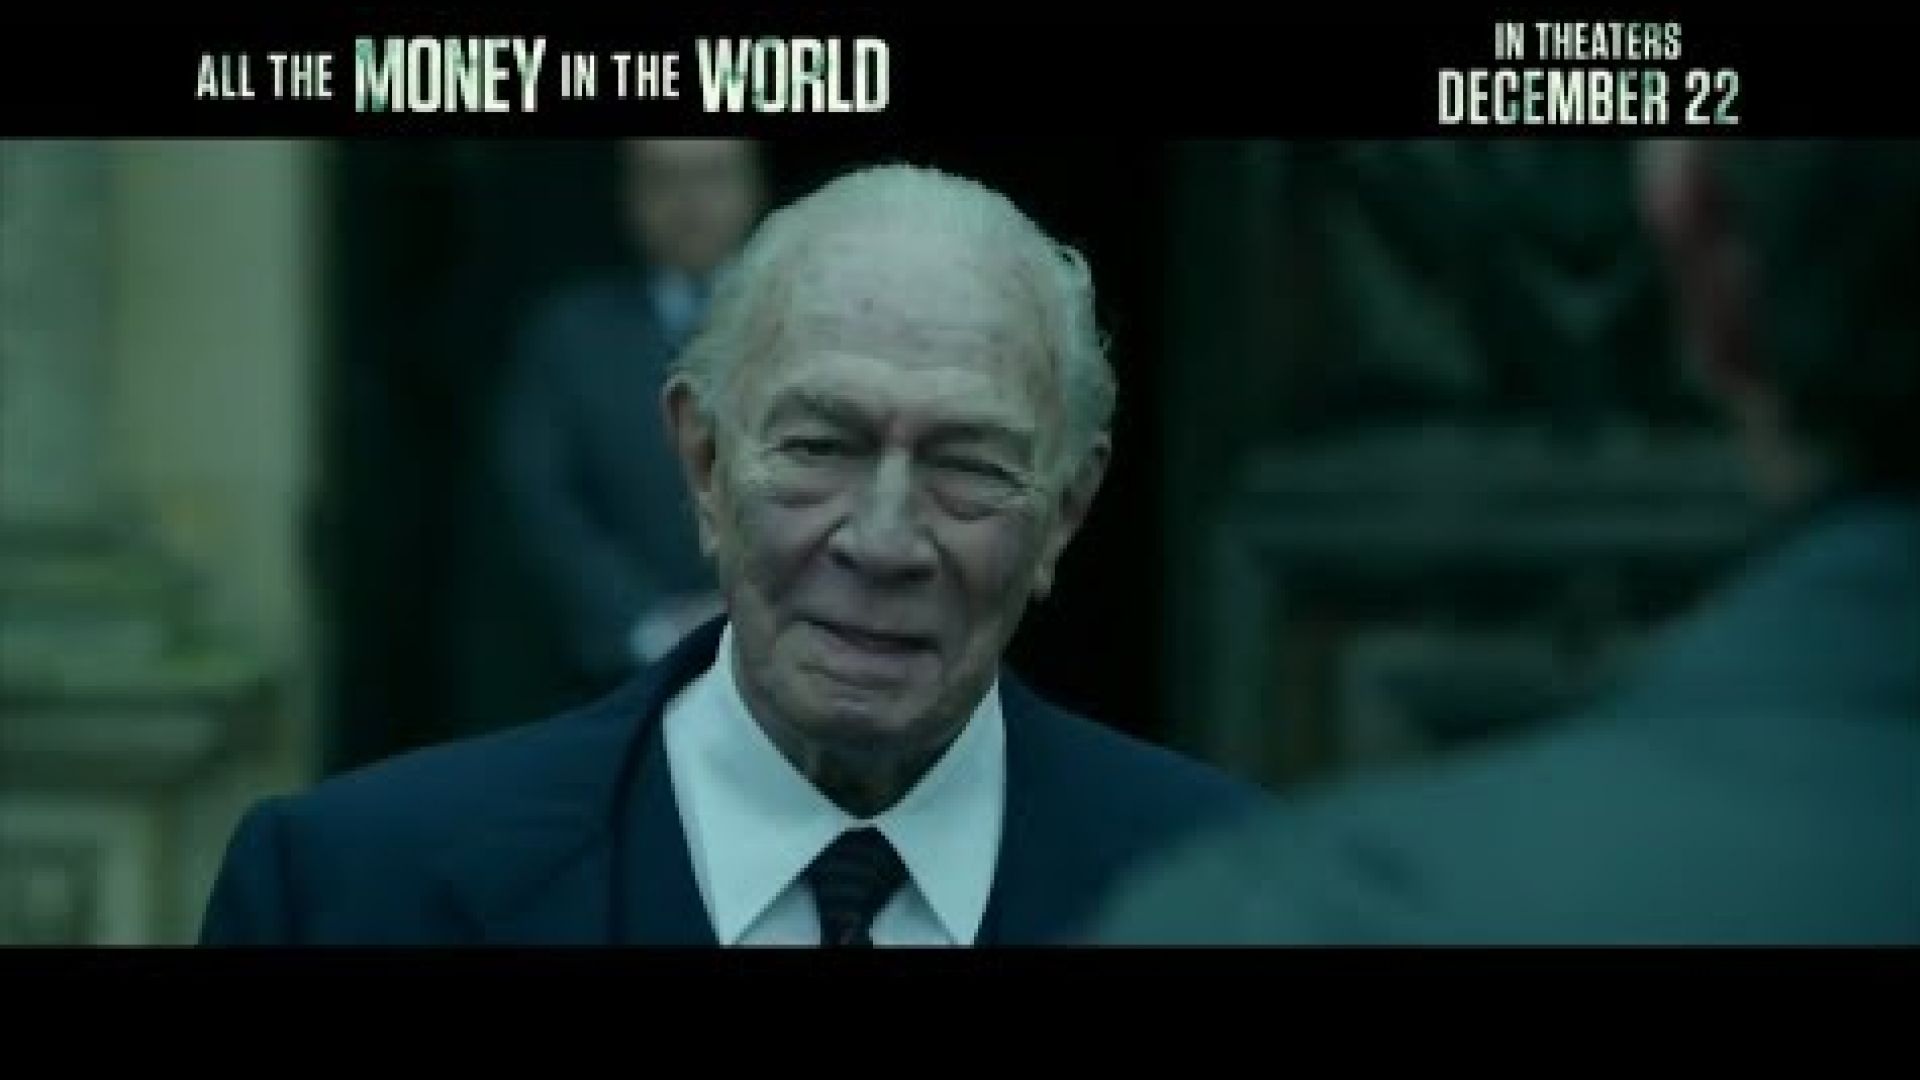 All The Money In The World Trailer - Featuring Christopher P